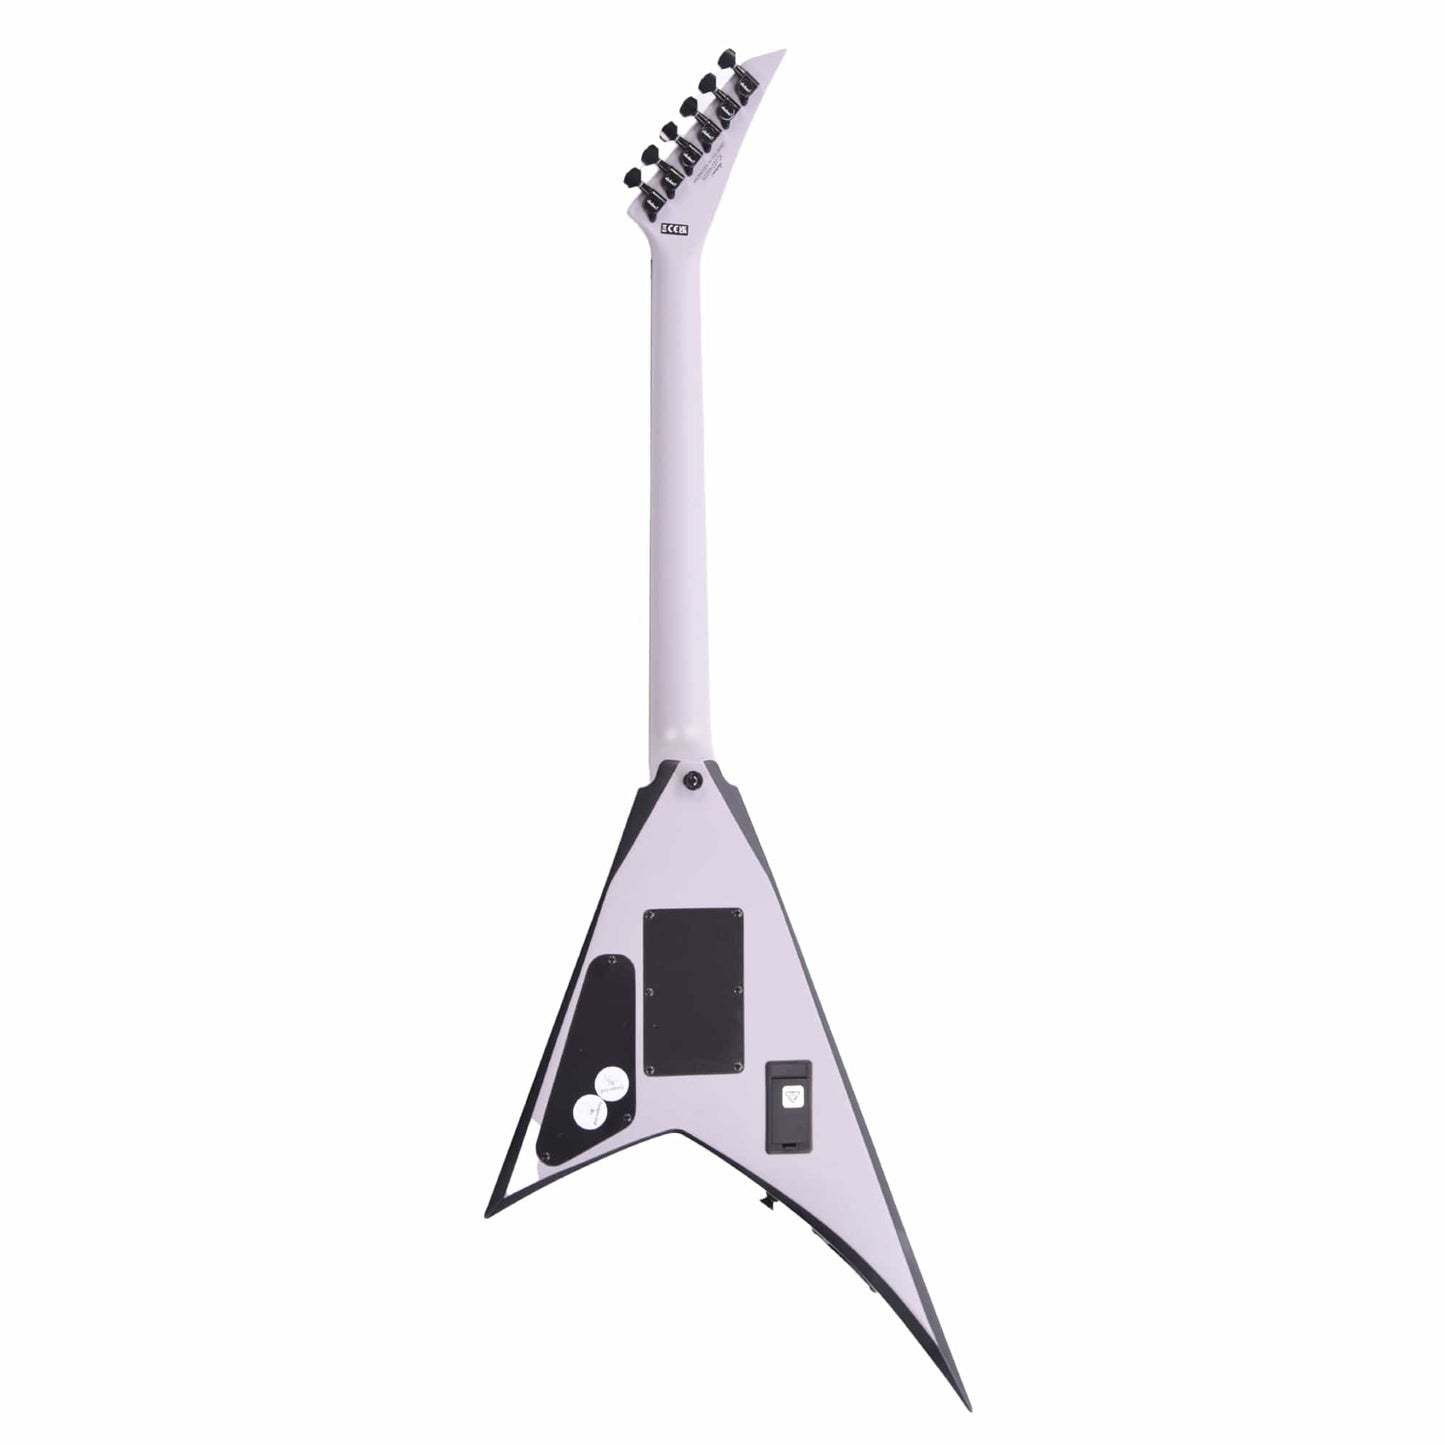 Jackson X Series Rhoads RRX24 Battle Ship Gray with Black Bevels Electric Guitars / Solid Body